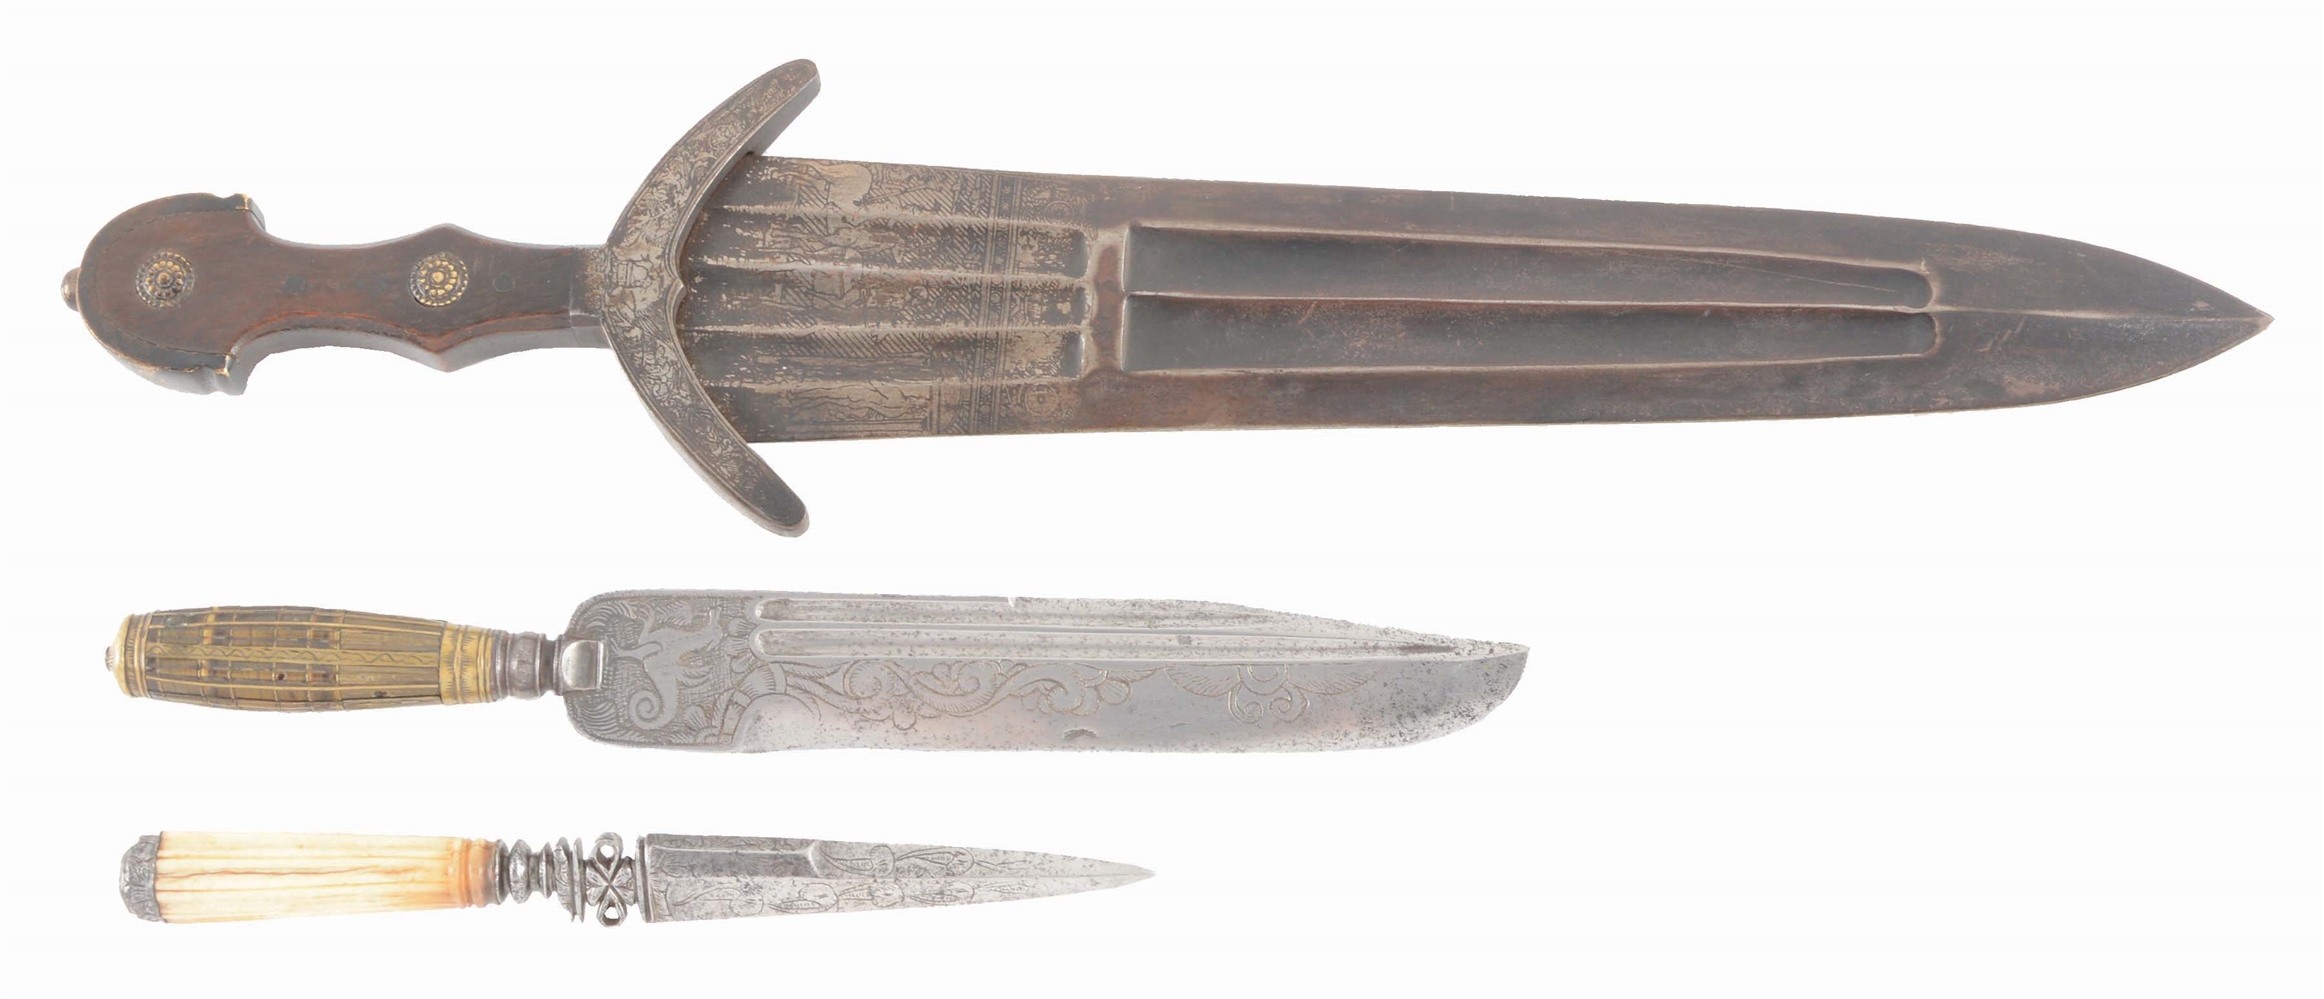 LOT OF 3: THREE EUROPEAN EDGED WEAPONS, VARIOUS DATES.